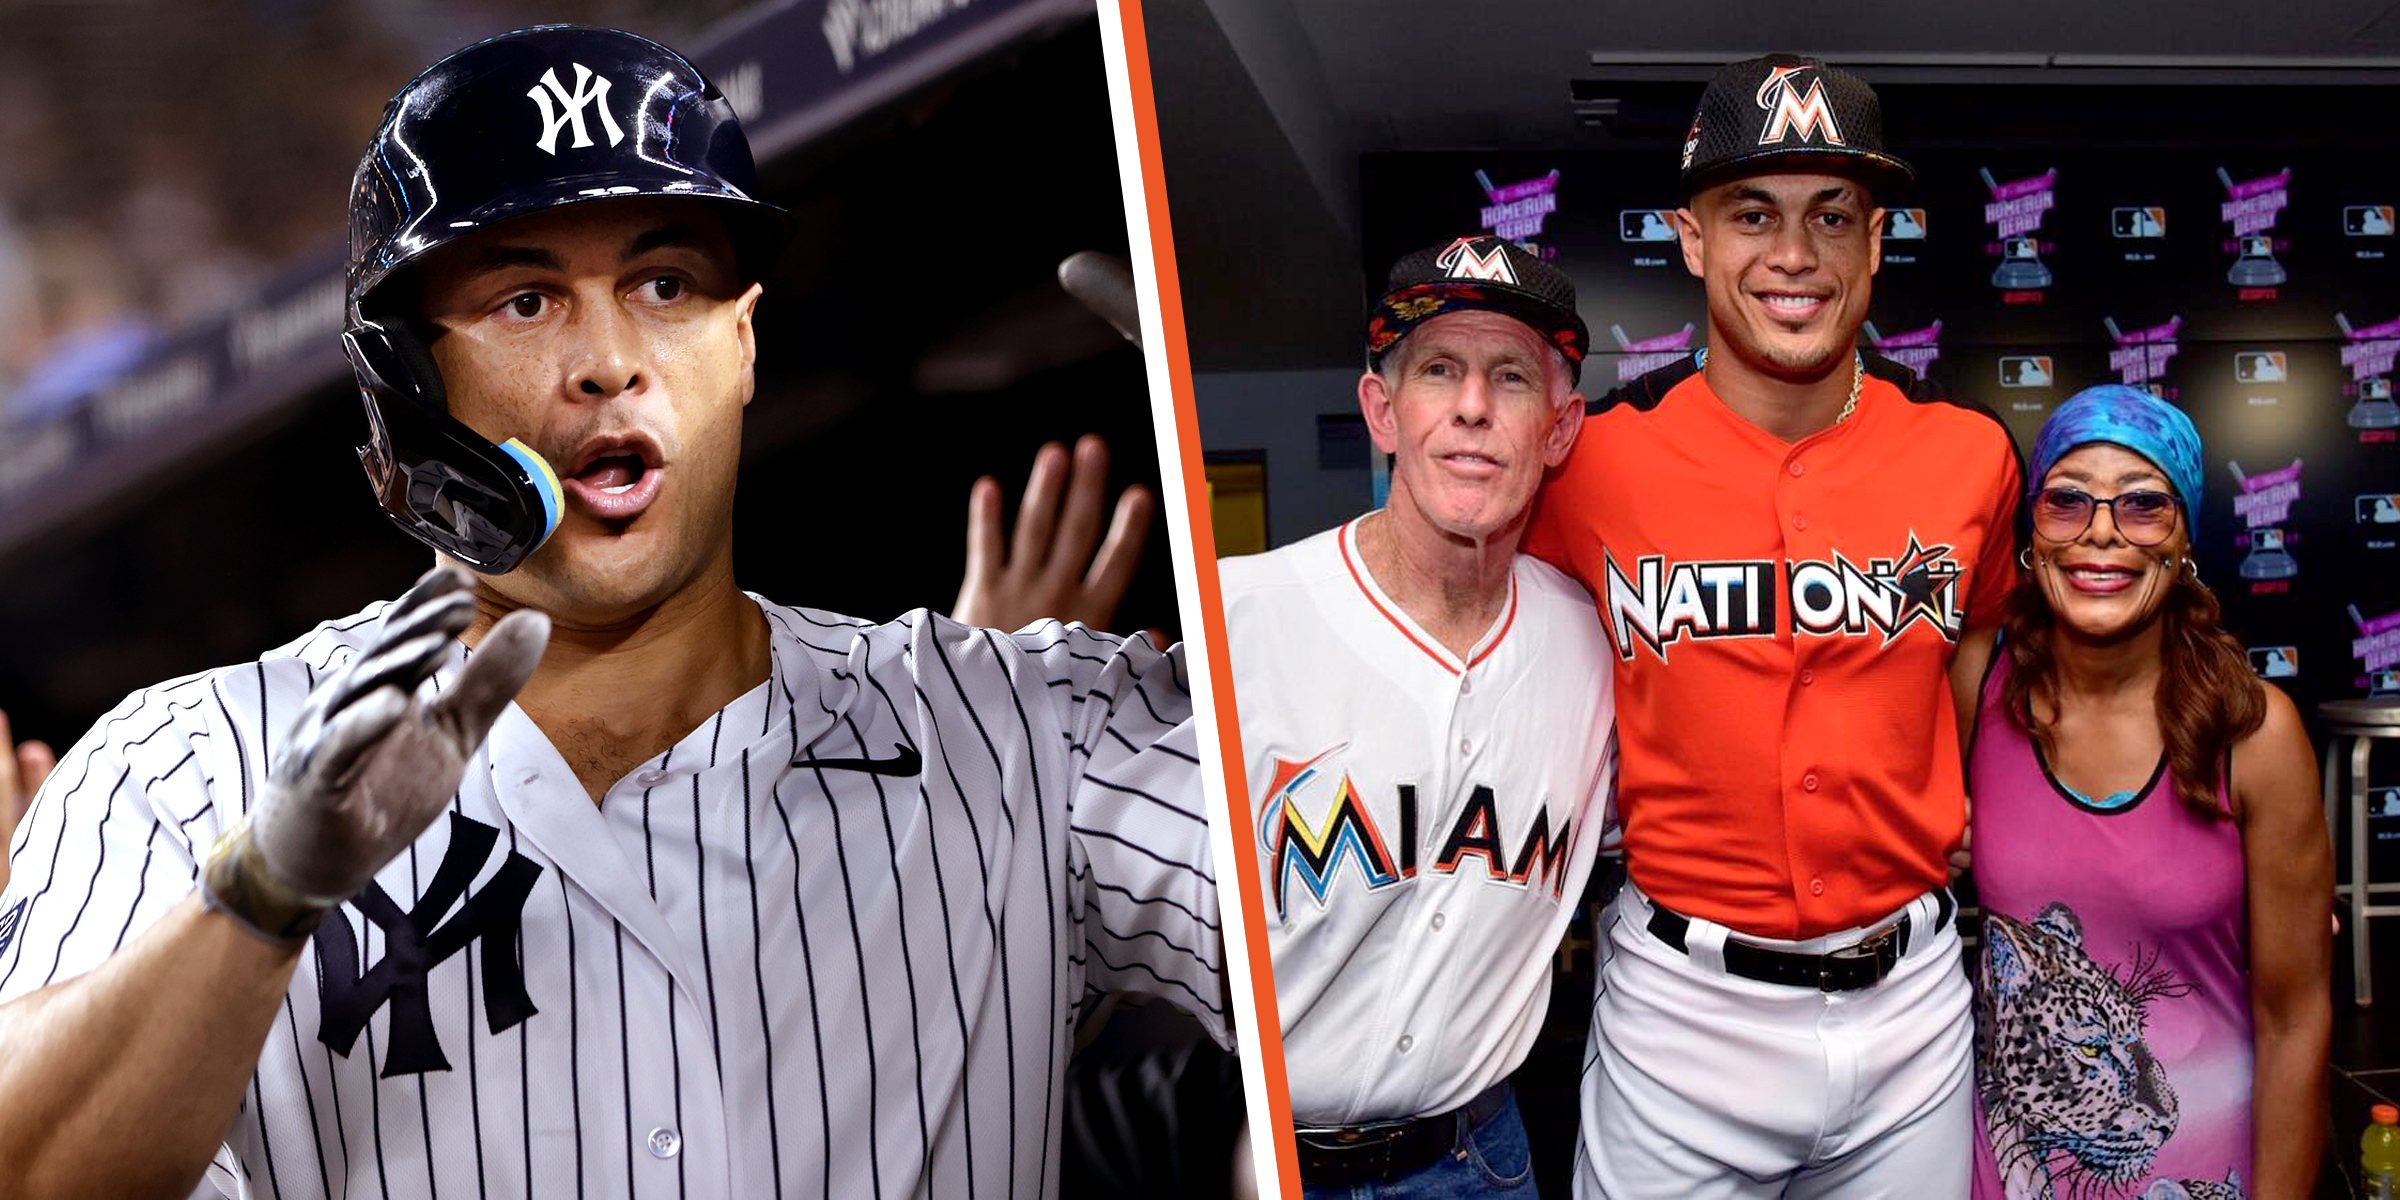 Giancarlo Stanton | Mike Stanton, Giancarlo Stanton, and Jacinta Garay | Source: Instagram/giancarlo818 | Getty Images